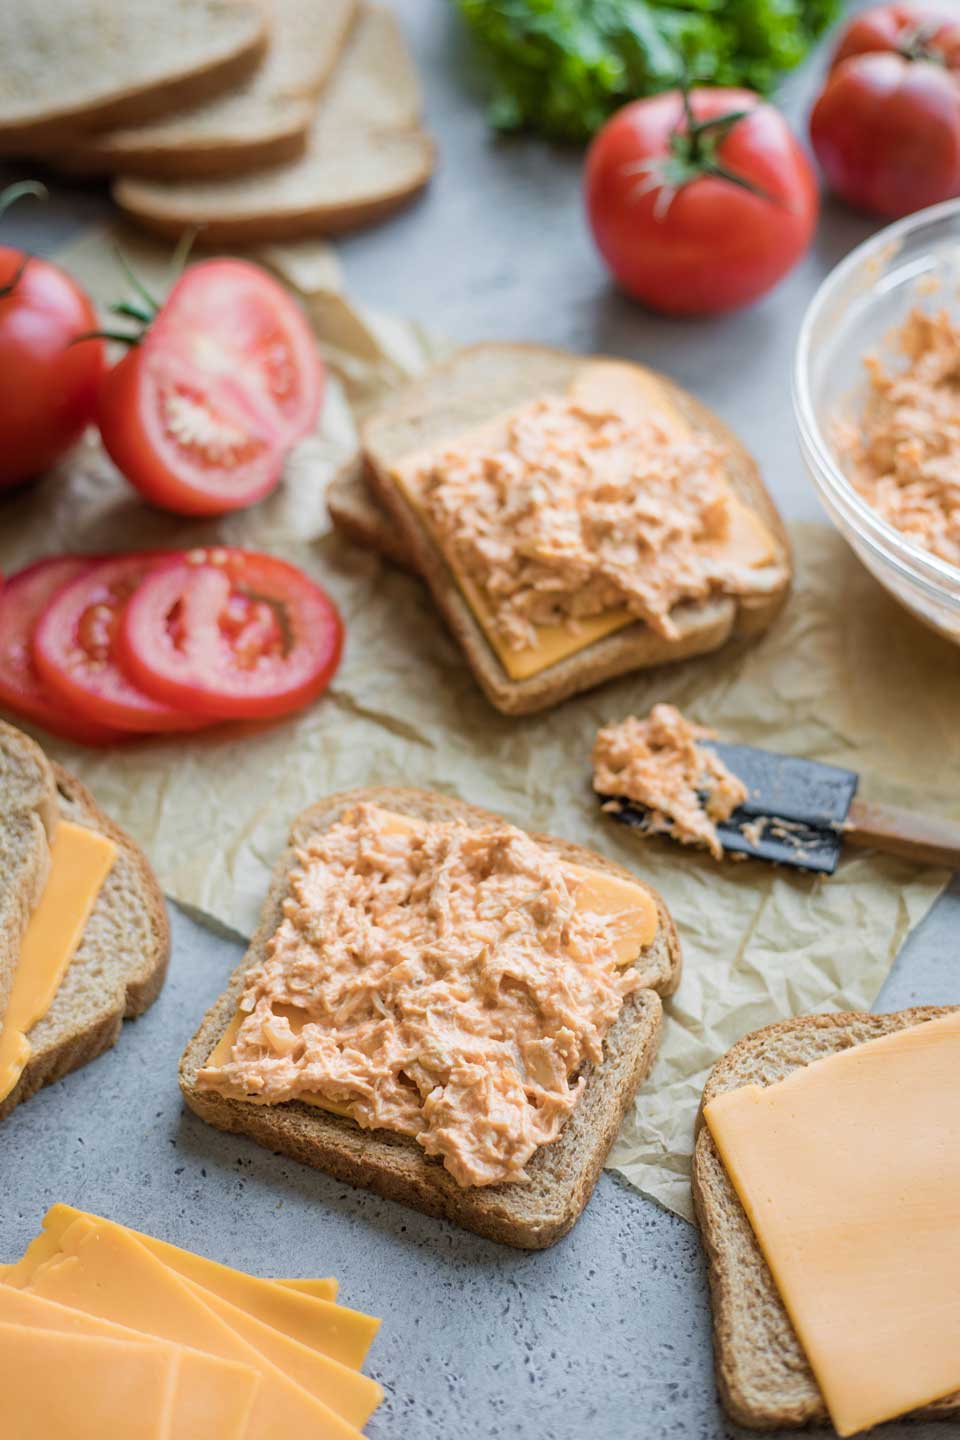 assembling the sandwiches: two slices of bread, each topped with a slice of cheese and spread with the Buffalo Chicken Dip filling